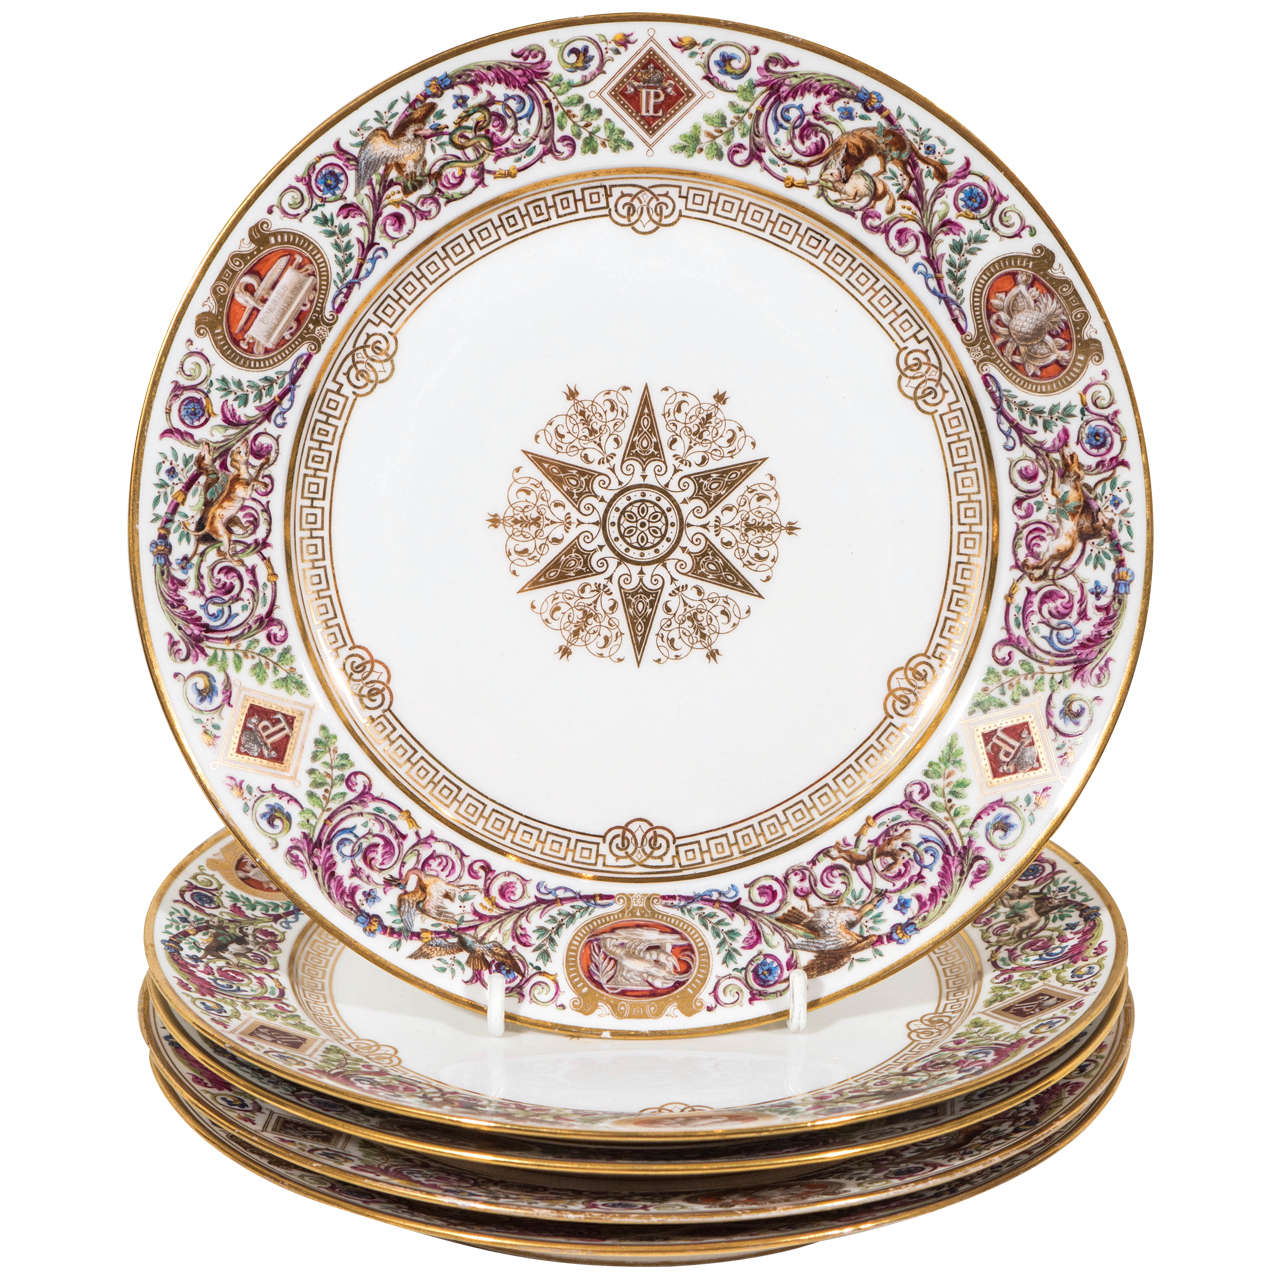 Set of Sèvres Dishes from the Hunting Service of Louis Philippe King of France